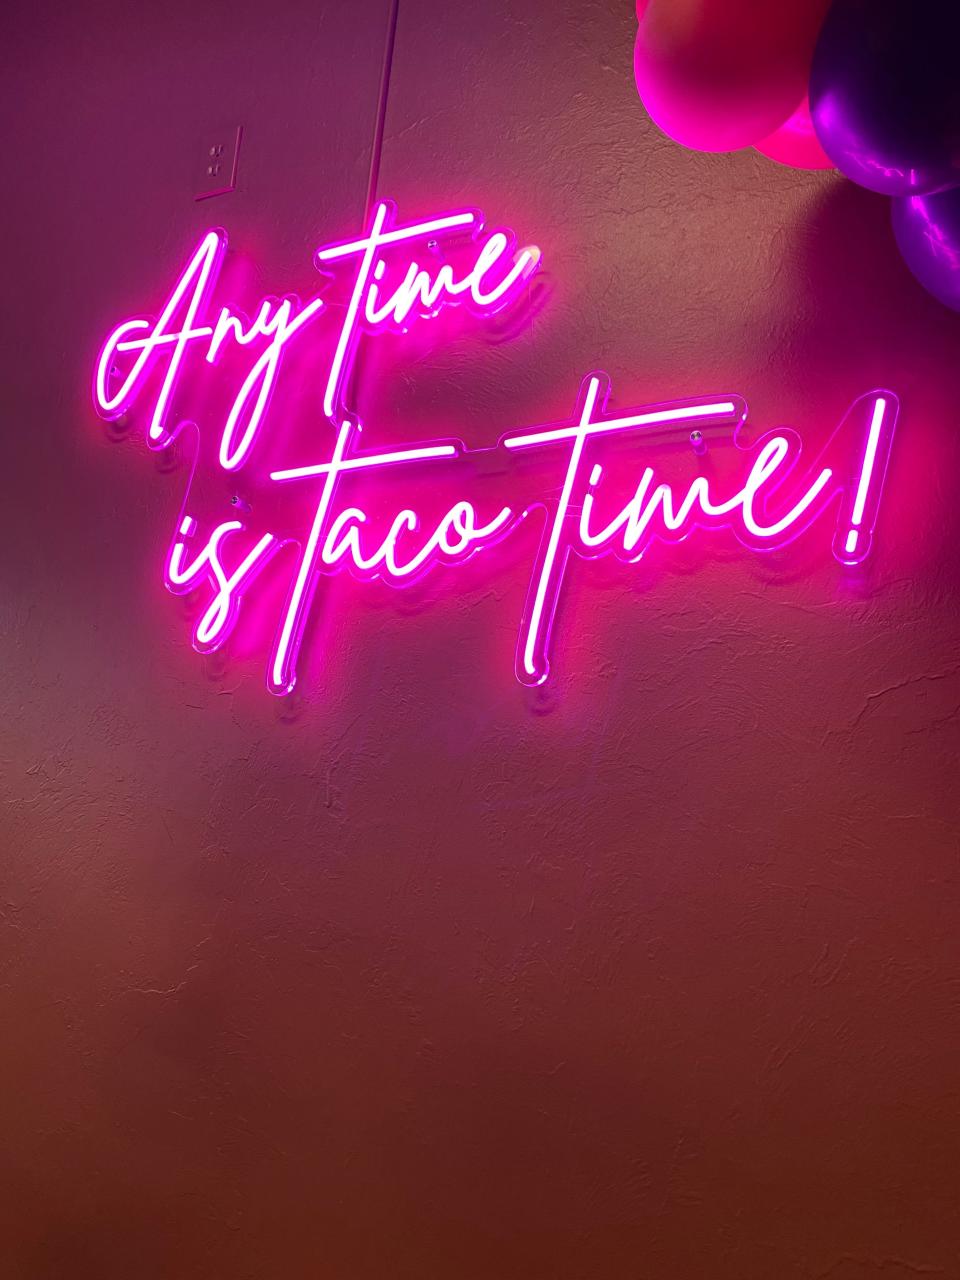 This pink neon sign is one of the decorating touches at the new Taco Empire brick and mortar location.